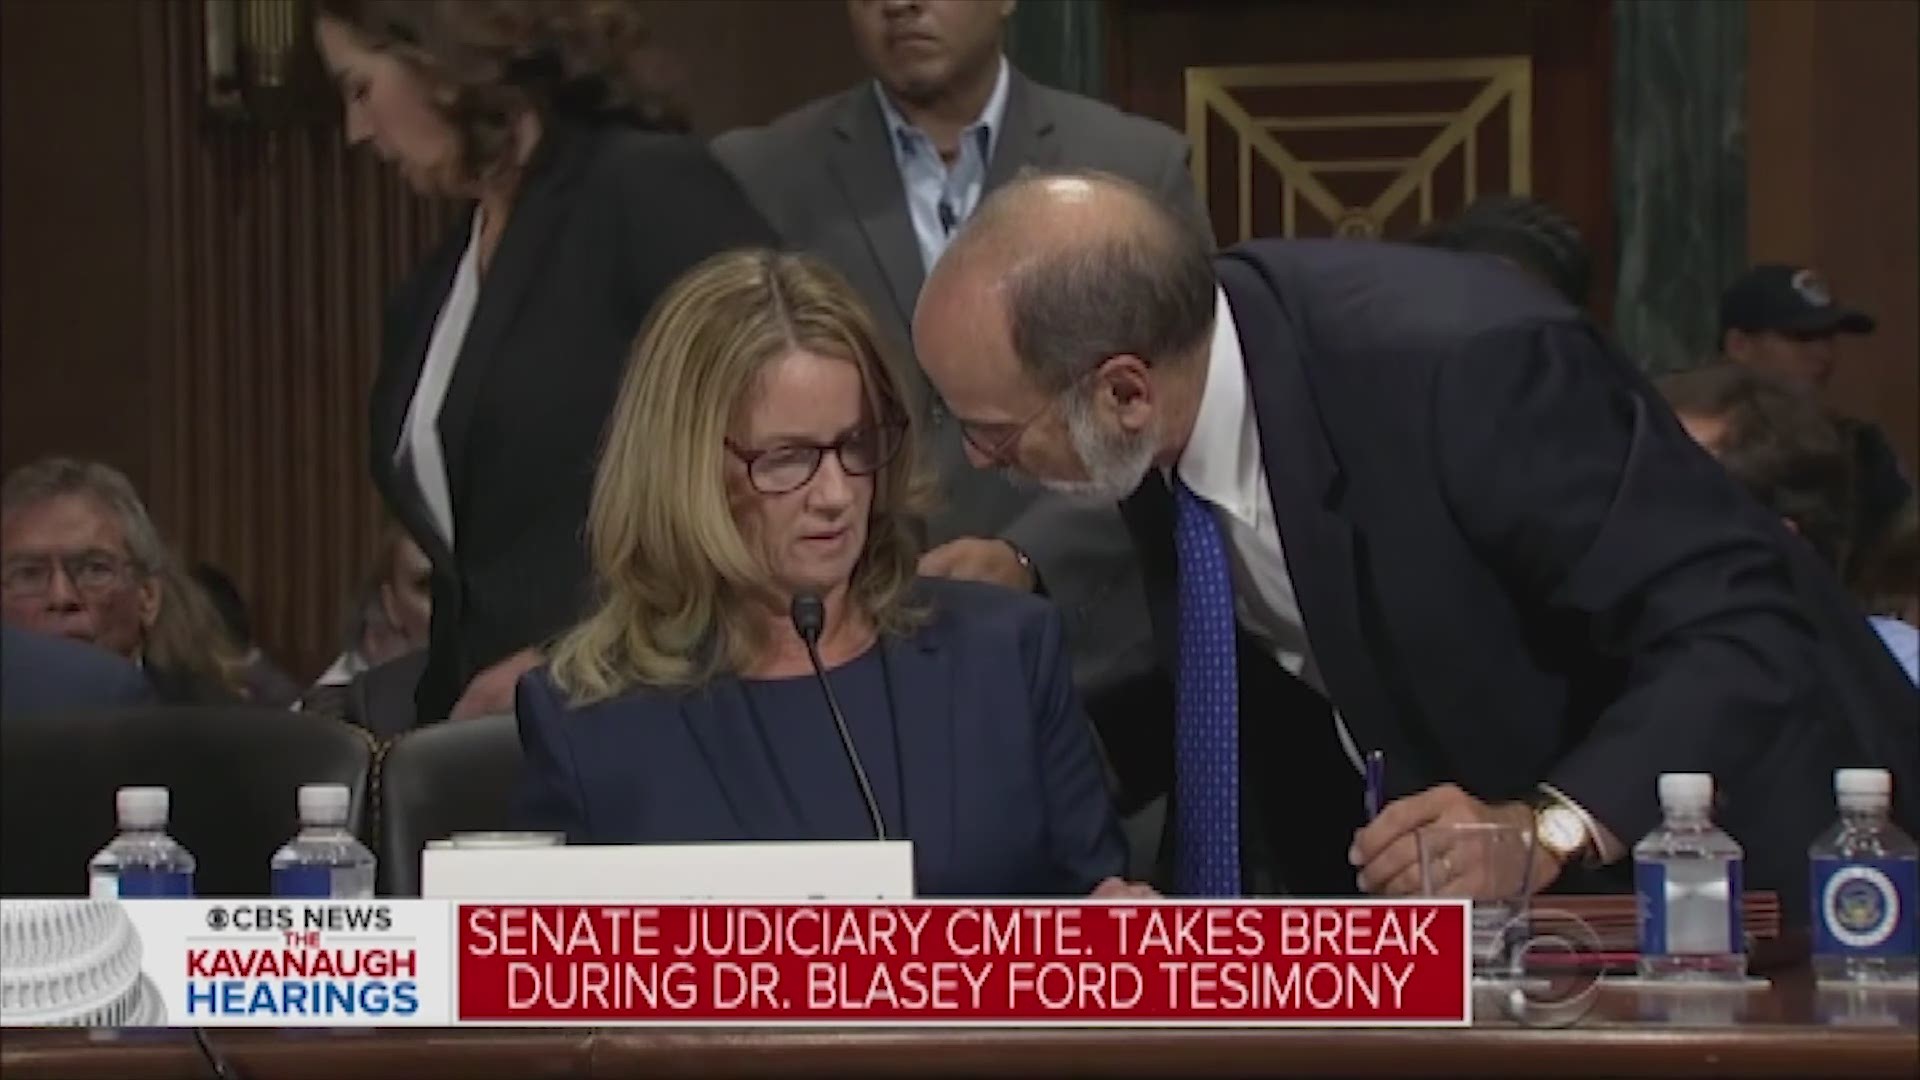 It's a quick moment caught on camera during the Brett Kavanaugh hearings that has a lot of people talking. Texas 18th District Representative Sheila Jackson Lee walked up to Dr. Christine Blasey Ford's lawyer and handed him something which he quickly put